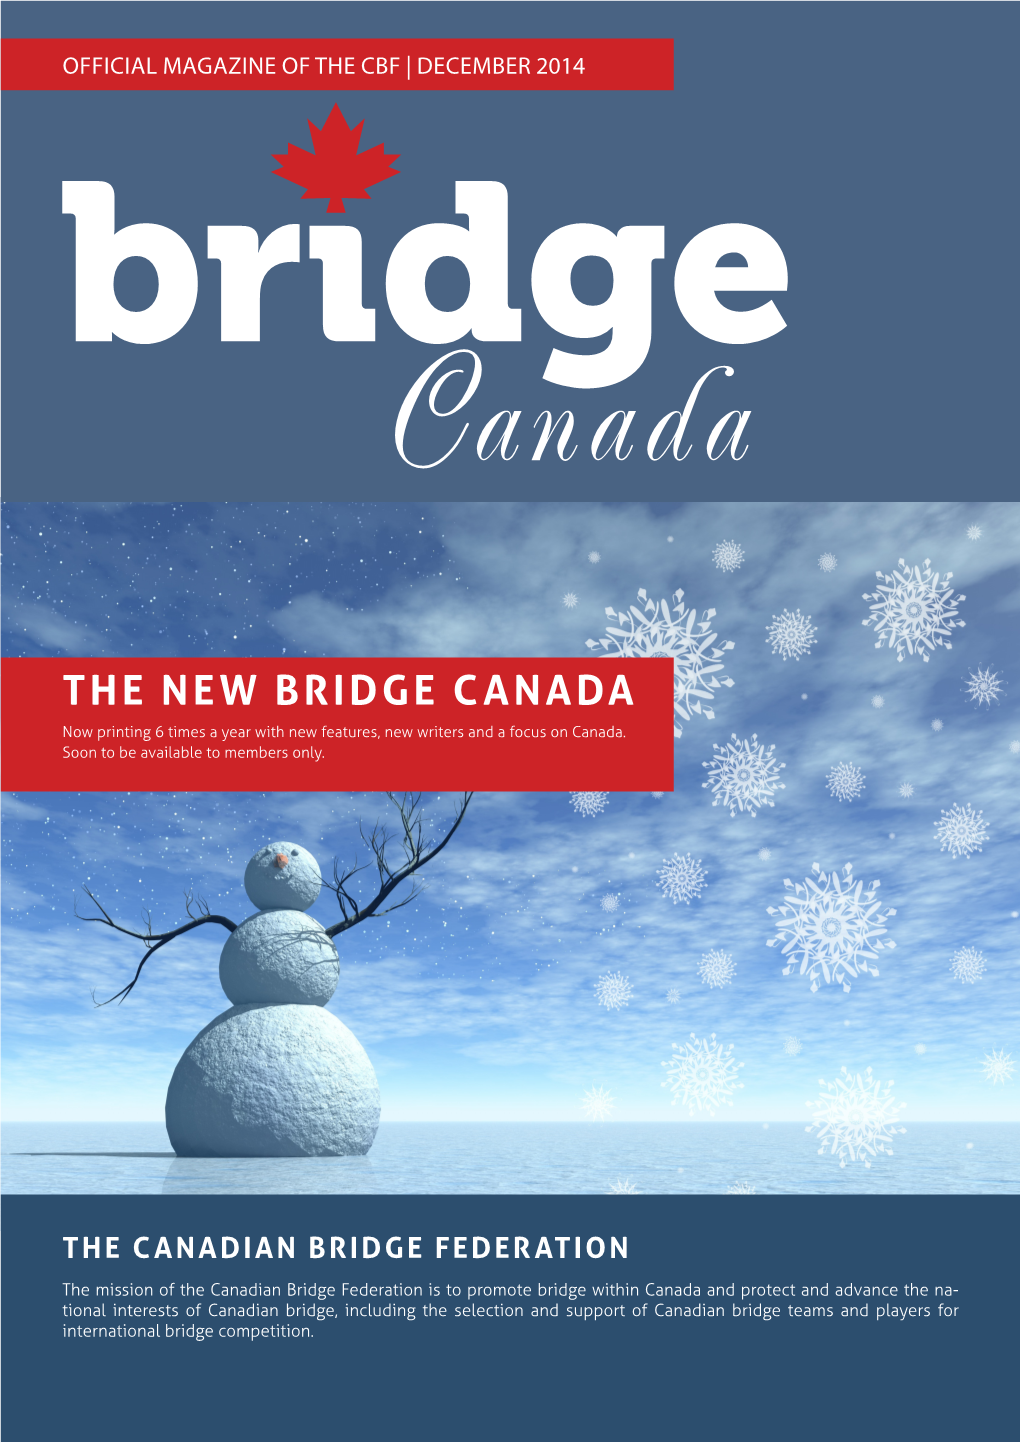 The New Bridge Canada Now Printing 6 Times a Year with New Features, New Writers and a Focus on Canada